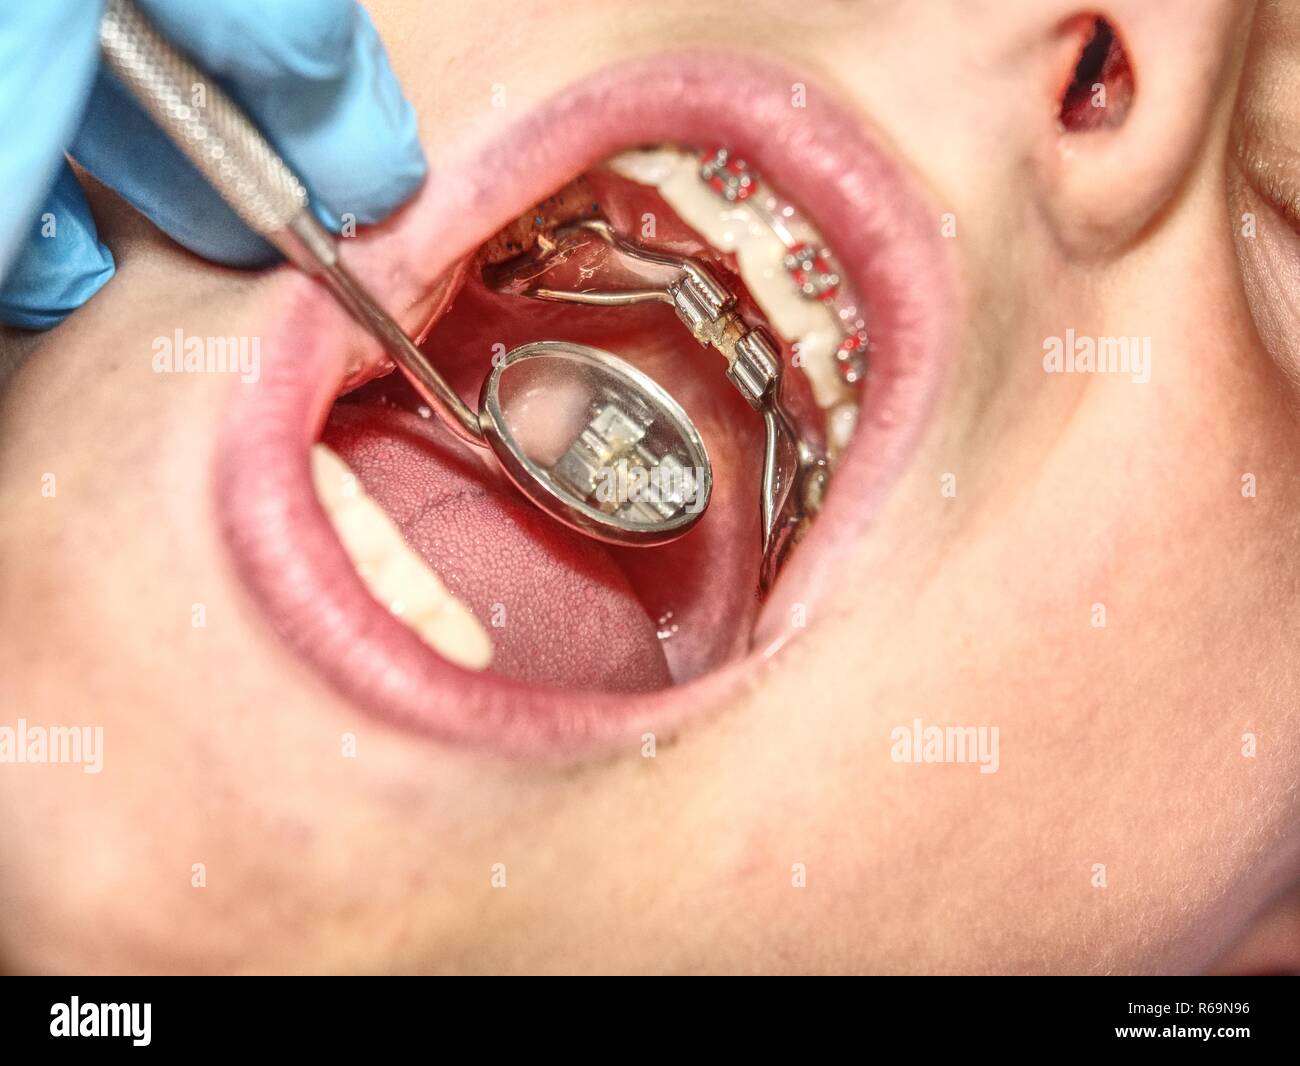 Prague, Czech Republic September 28th 2018. The Hyrax (Hygienic Rapid Expander) Banded designed as an upper arch rapid palatal expanding appliance. Stock Photo